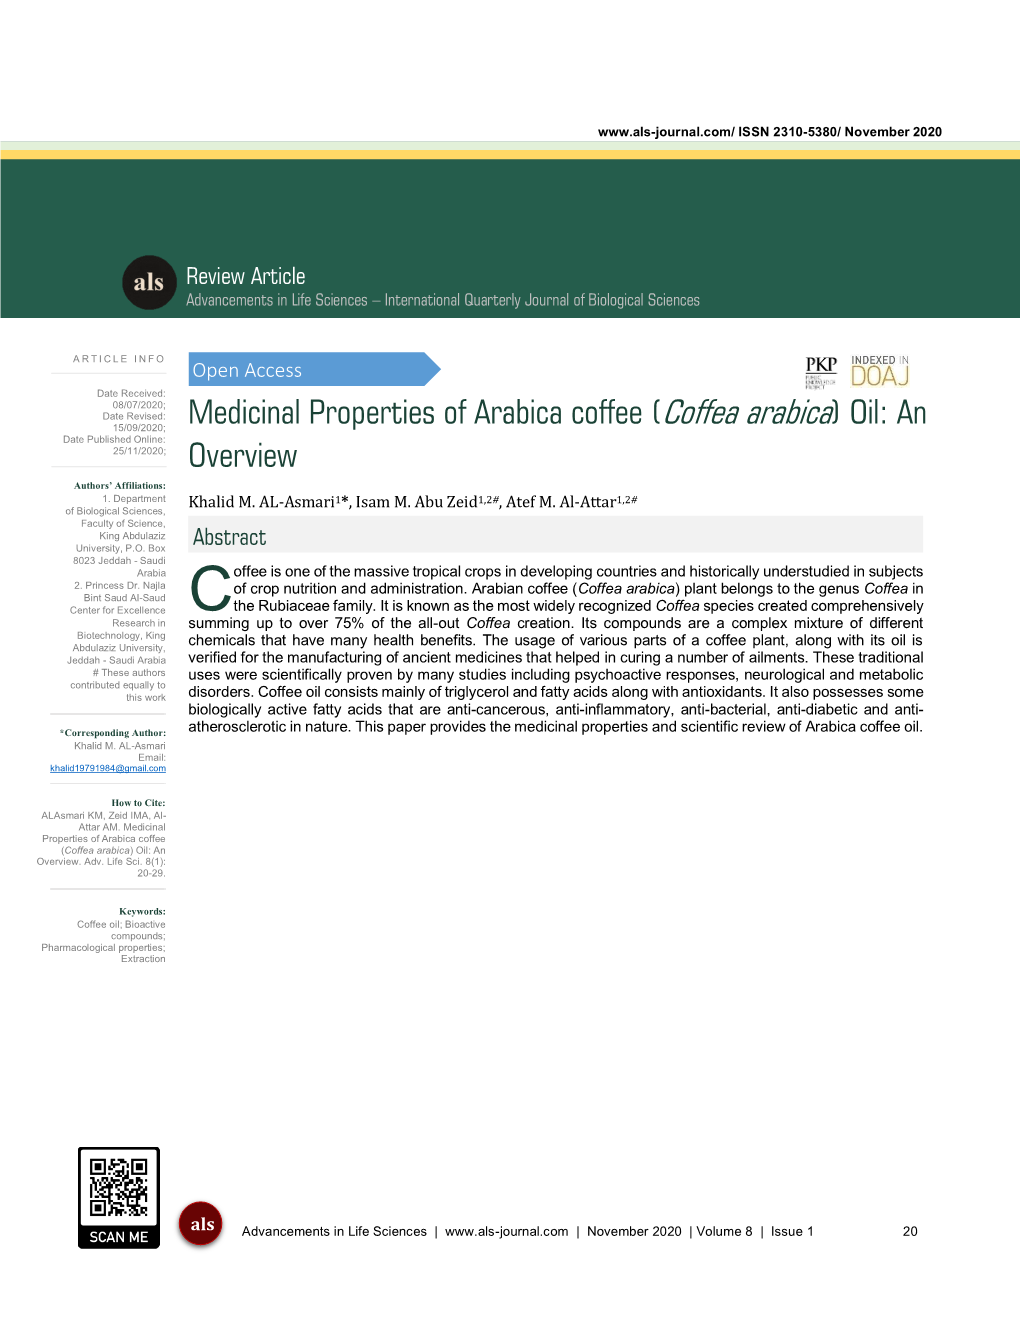 Medicinal Properties of Arabica Coffee (Coffea Arabica) Oil: an Date Published Online: 25/11/2020; Overview